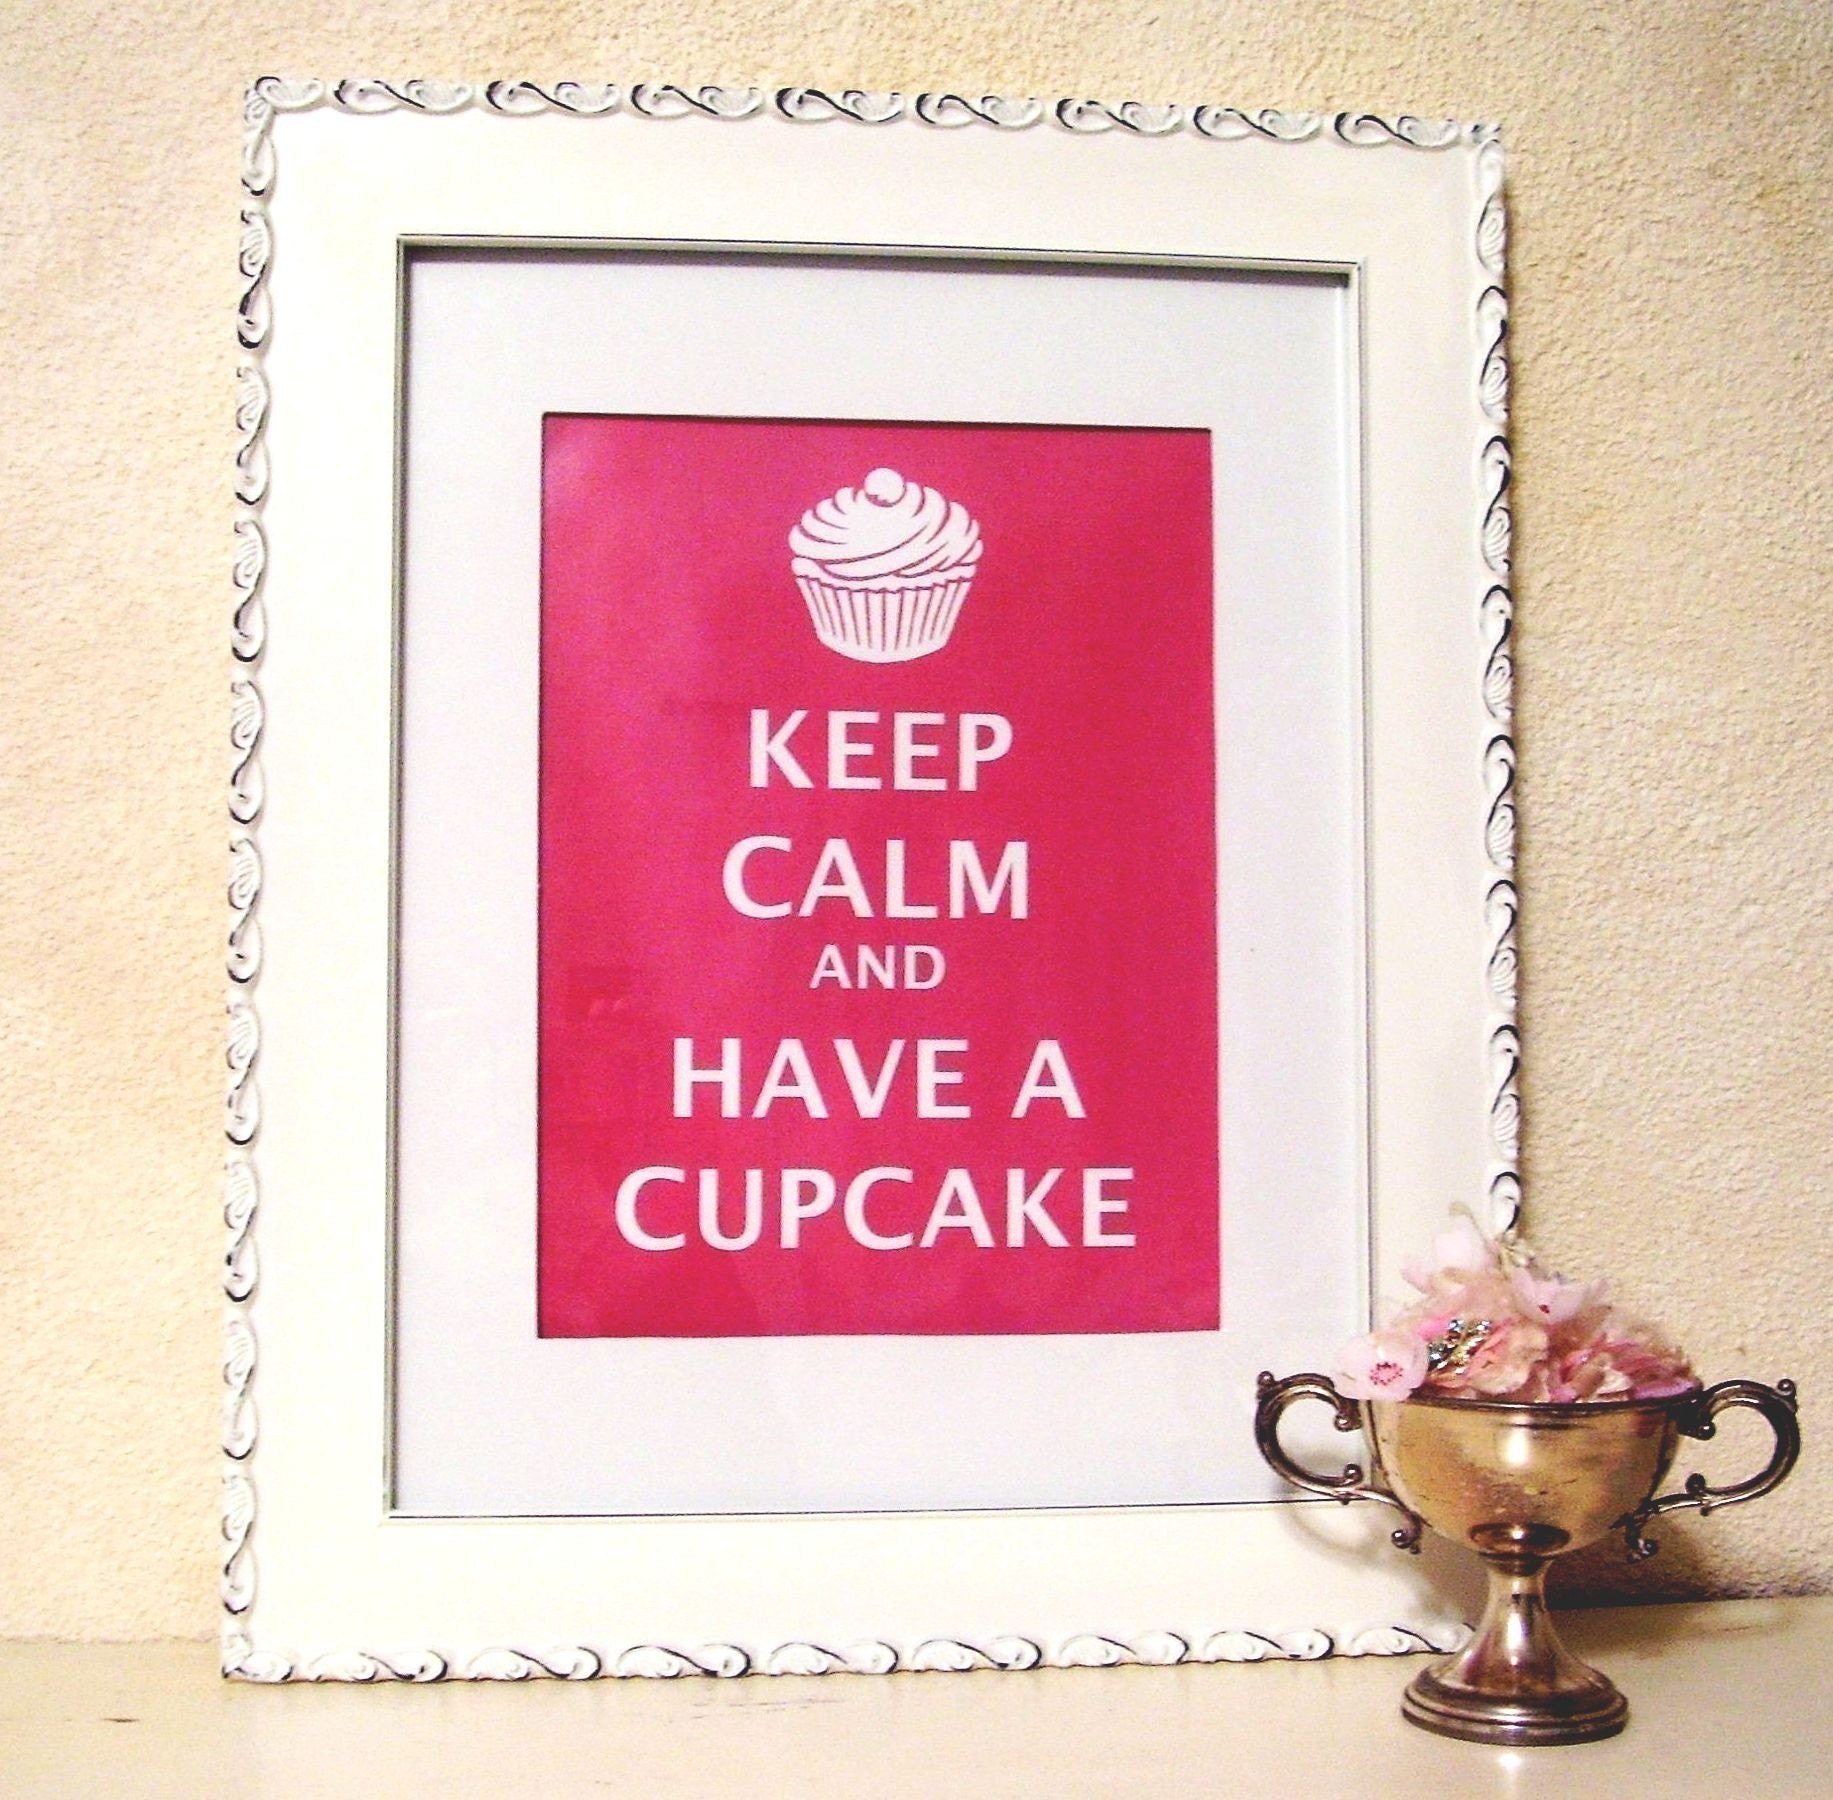 KEEP CALM AND HAVE A CUPCAKE ready to frame matted PRINT fits 11x 14 frame vintage RED